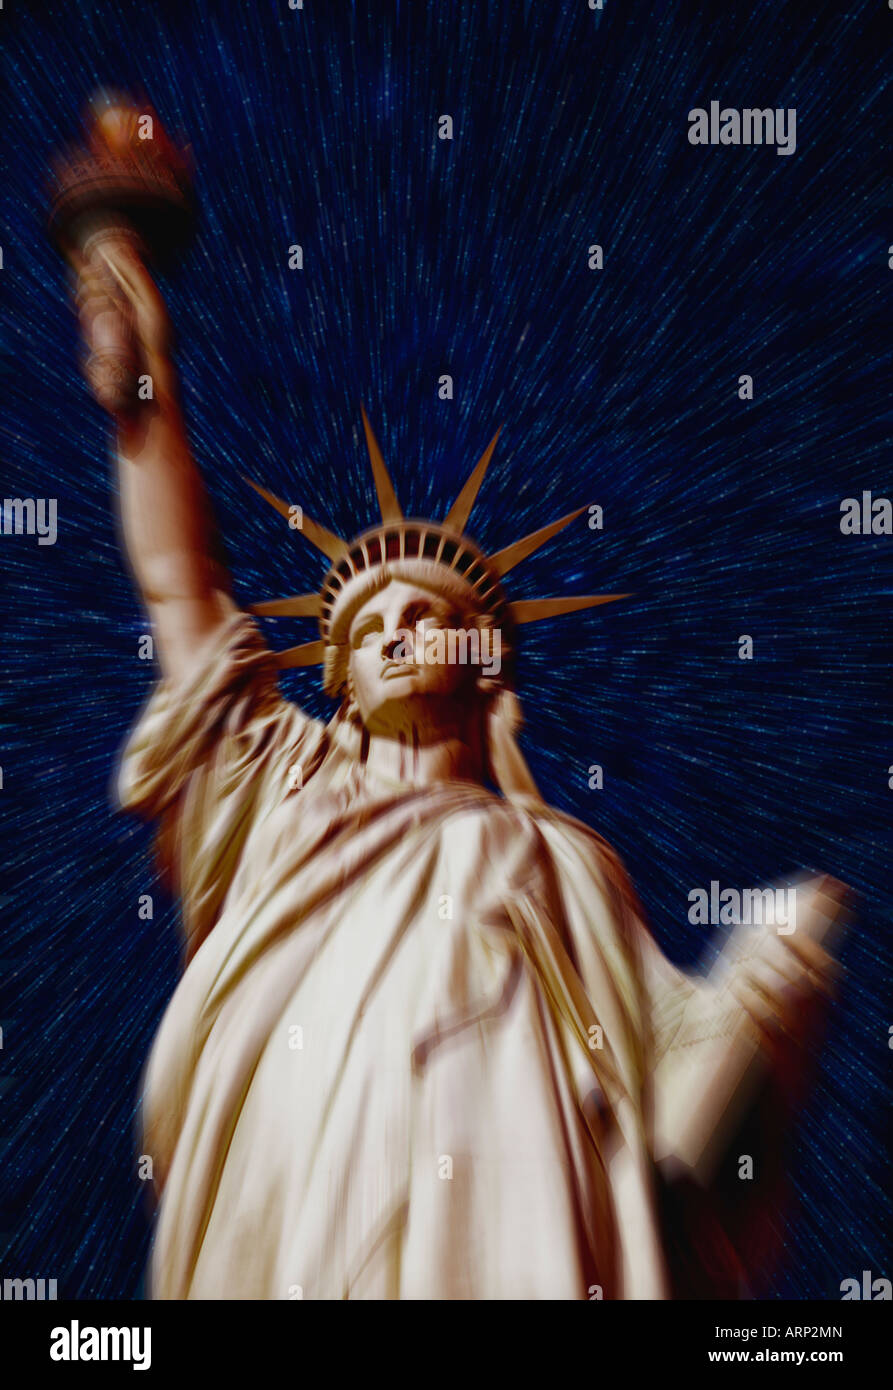 USA, New York City, Statue of Liberty, with star field, zoomed digital effect Stock Photo